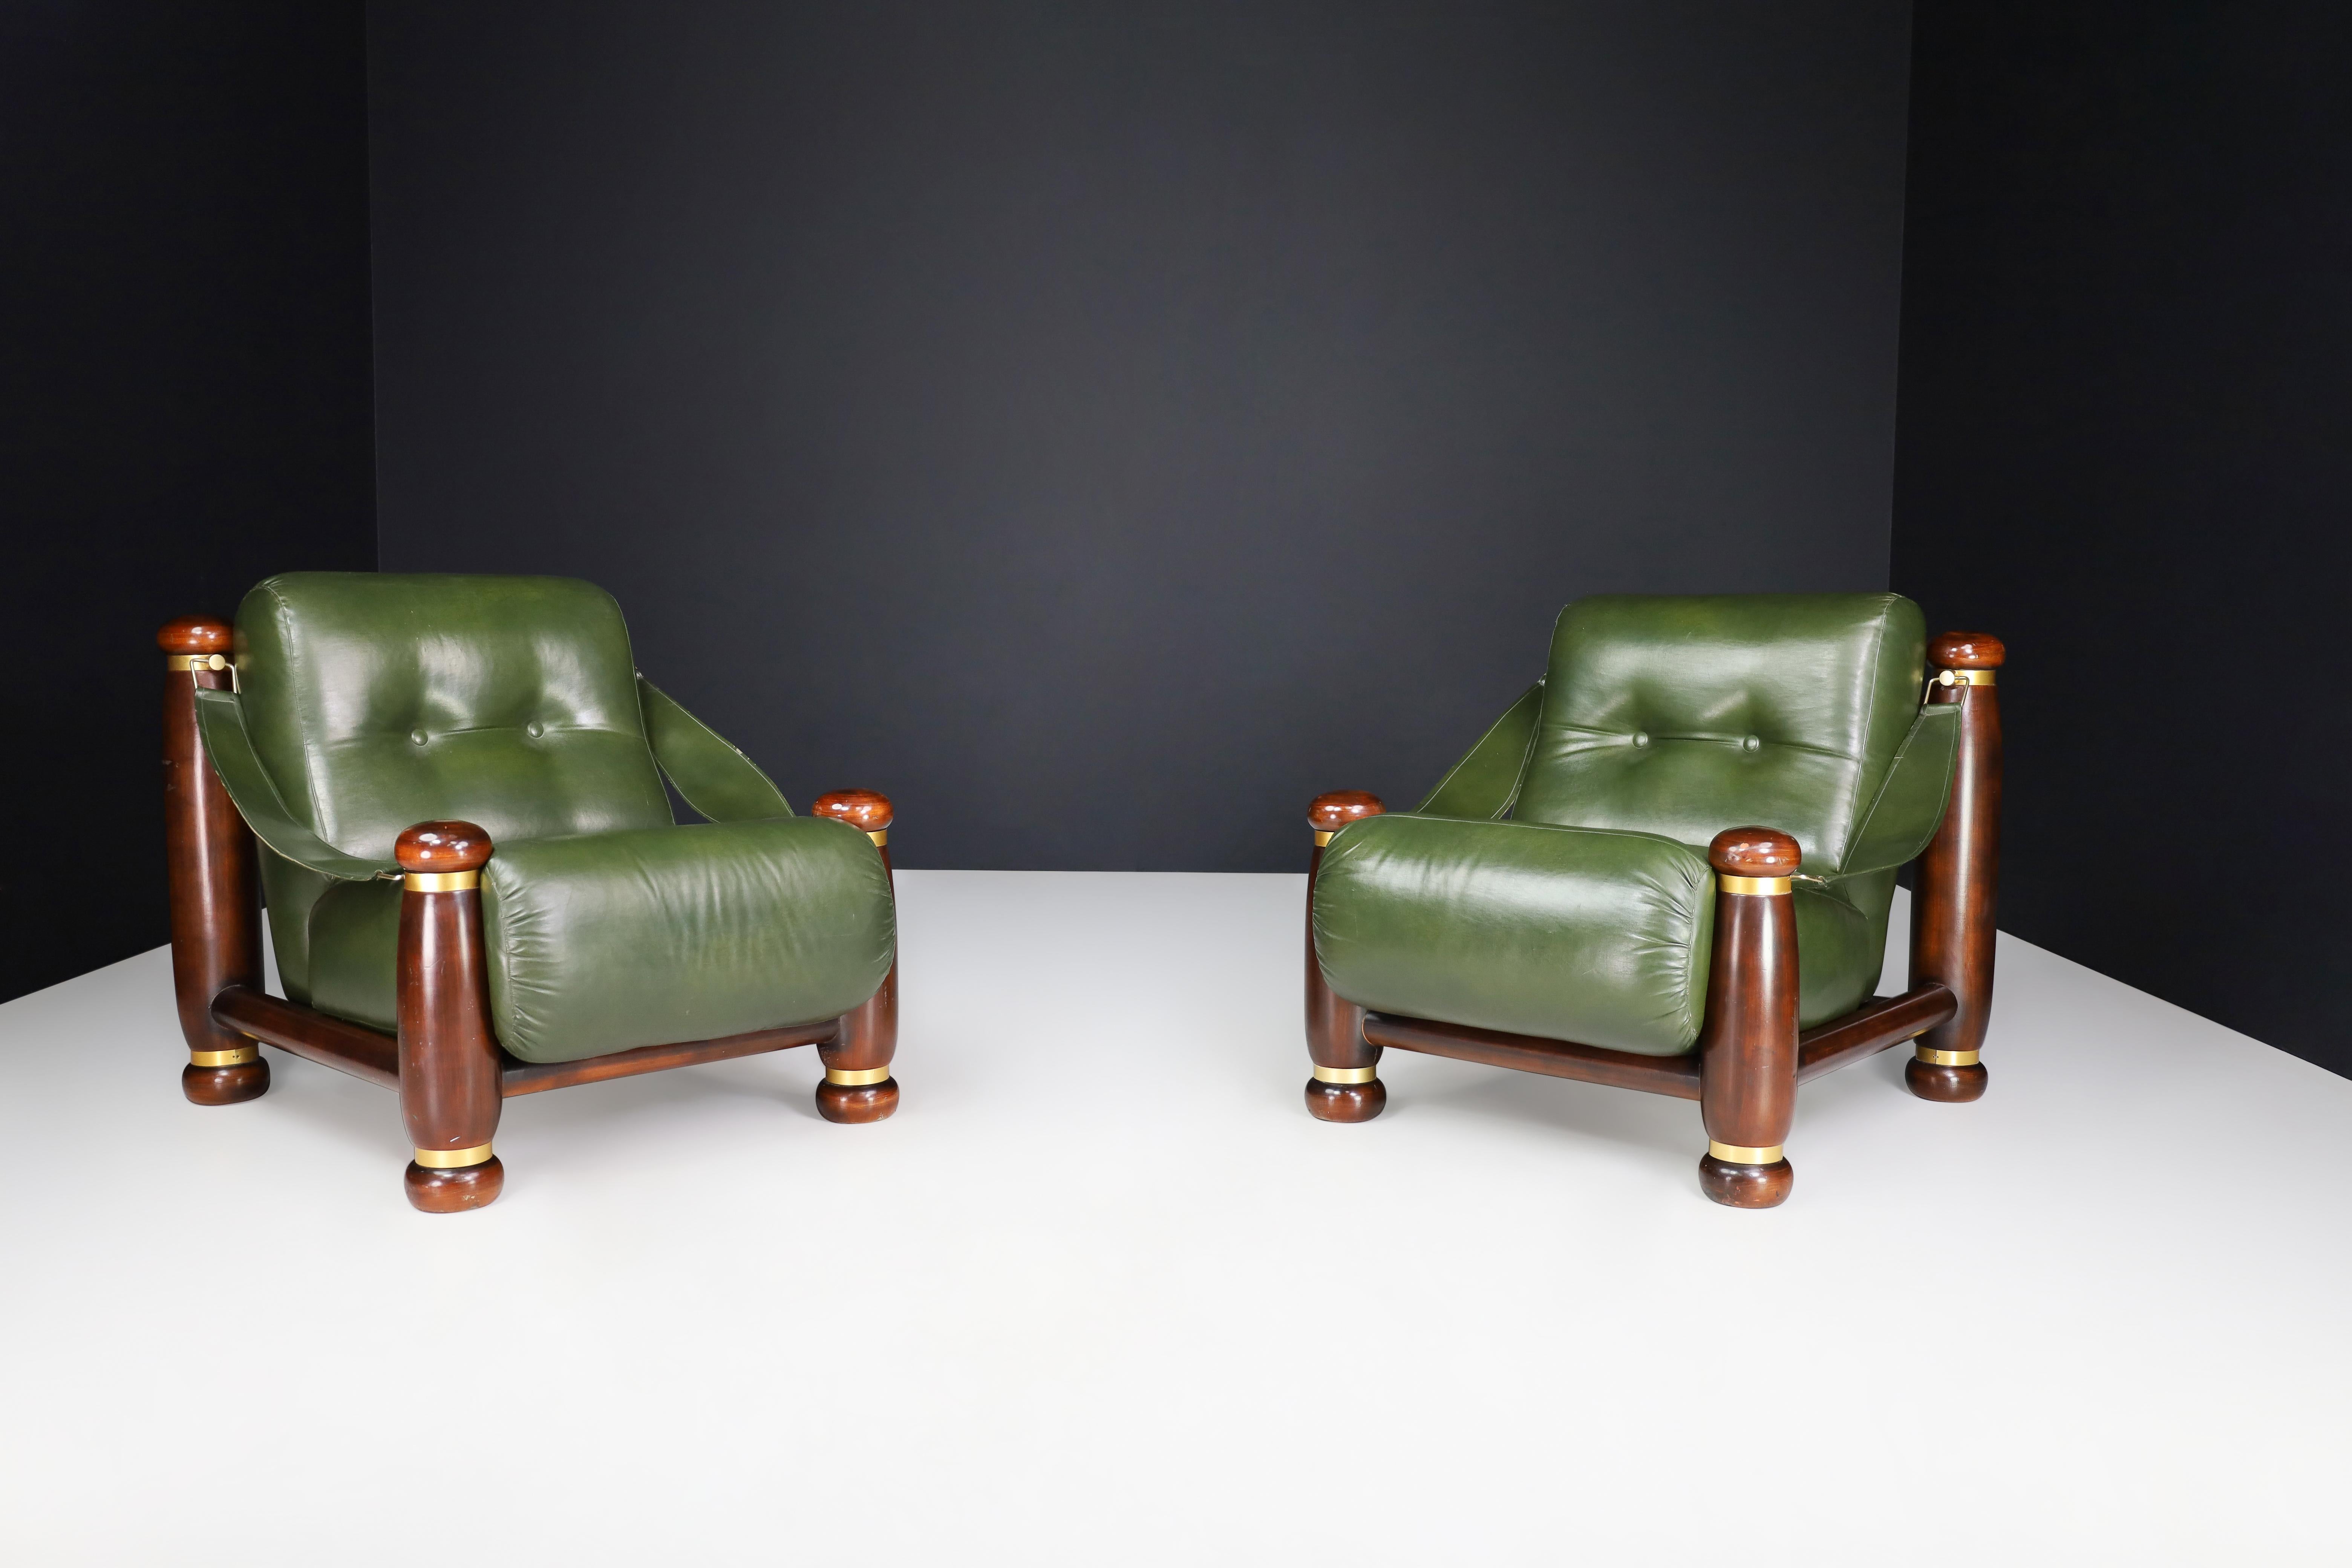 20th Century Walnut, Brass, and Green Leather Lounge Chairs from, Italy, 1960s For Sale